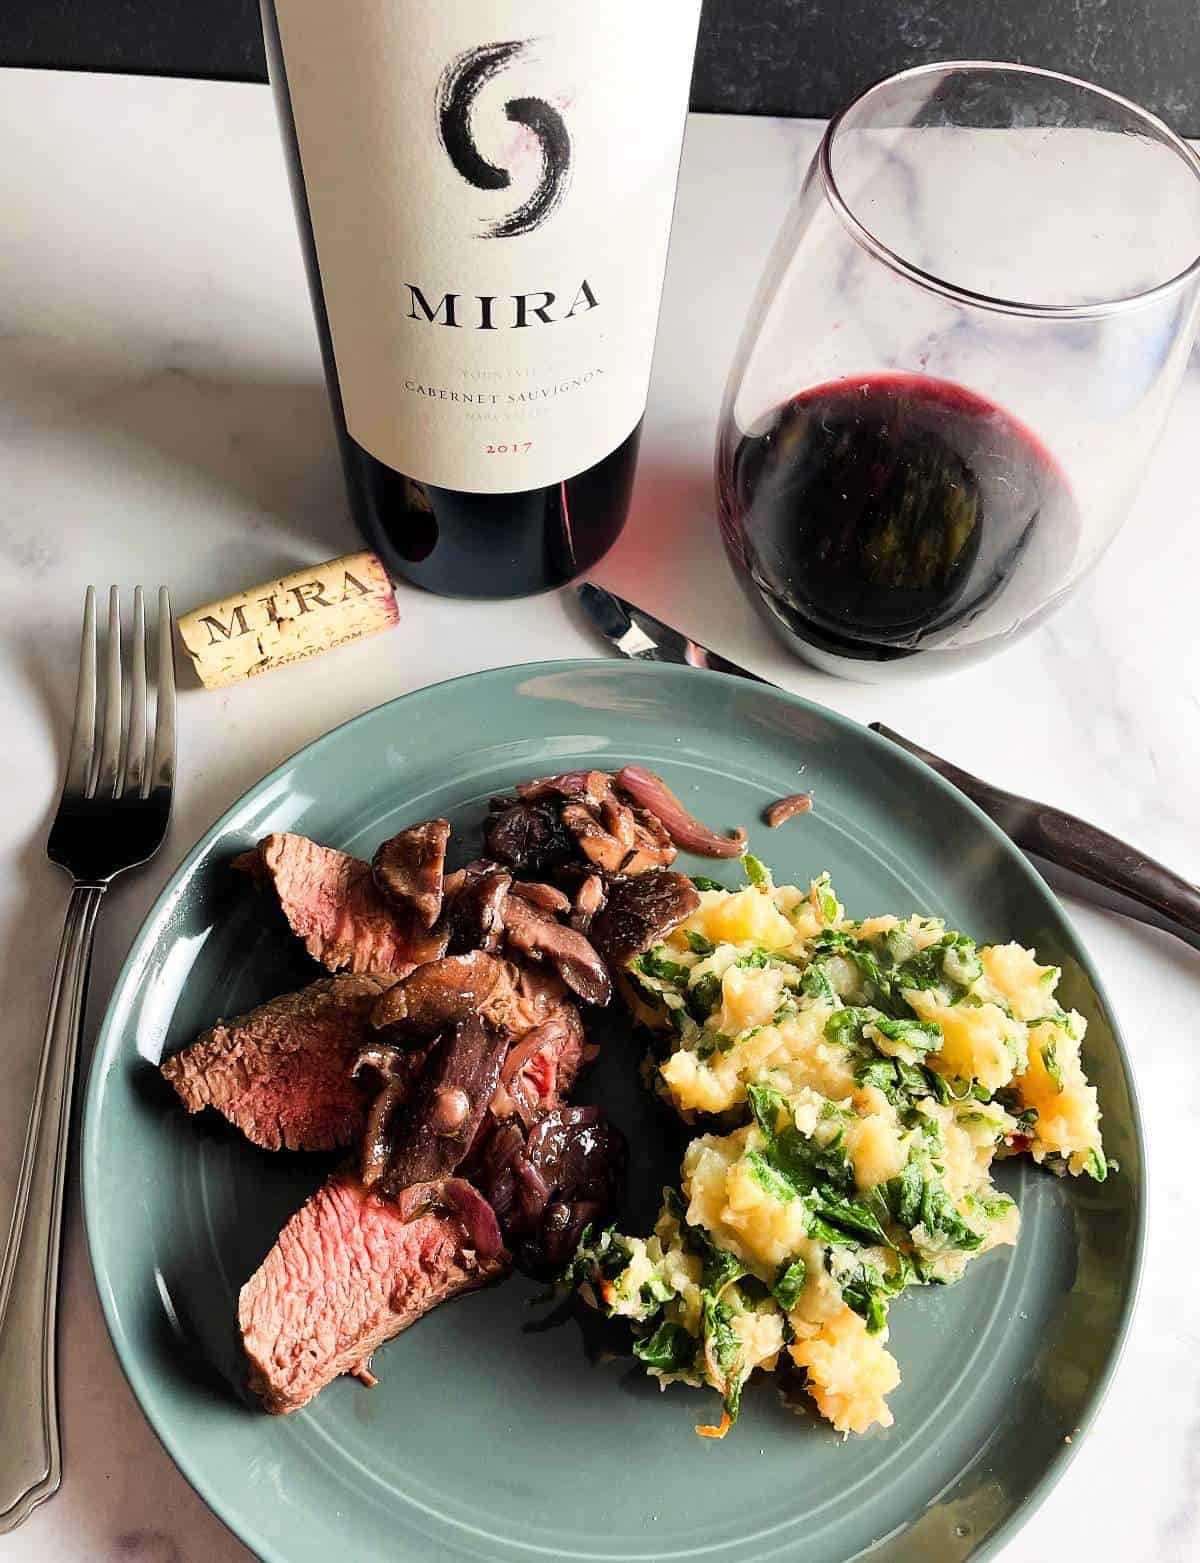 slices of steak topped with shiitake mushrooms, served with a side of Swiss chard potatoes. Bottle and glass of Mira Cabernet Sauvignon red wine in the background.